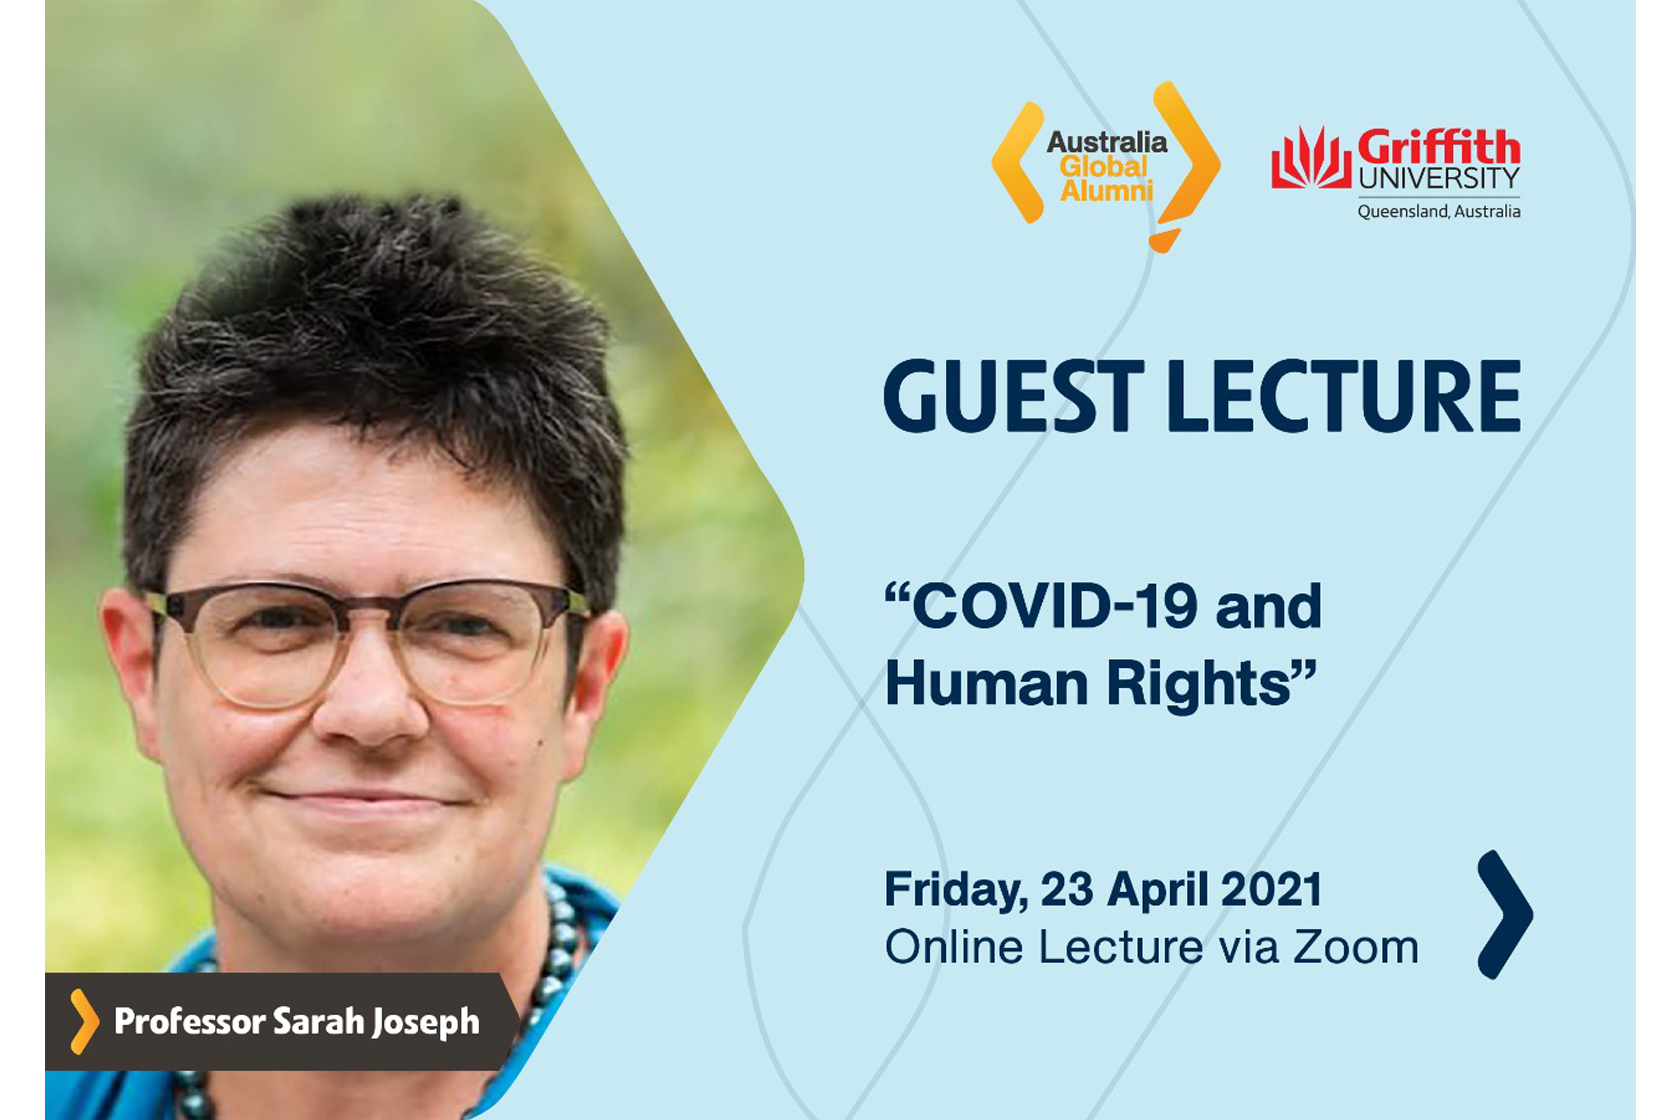 Join us at the Guest Lecture on COVID-19 and Human Rights